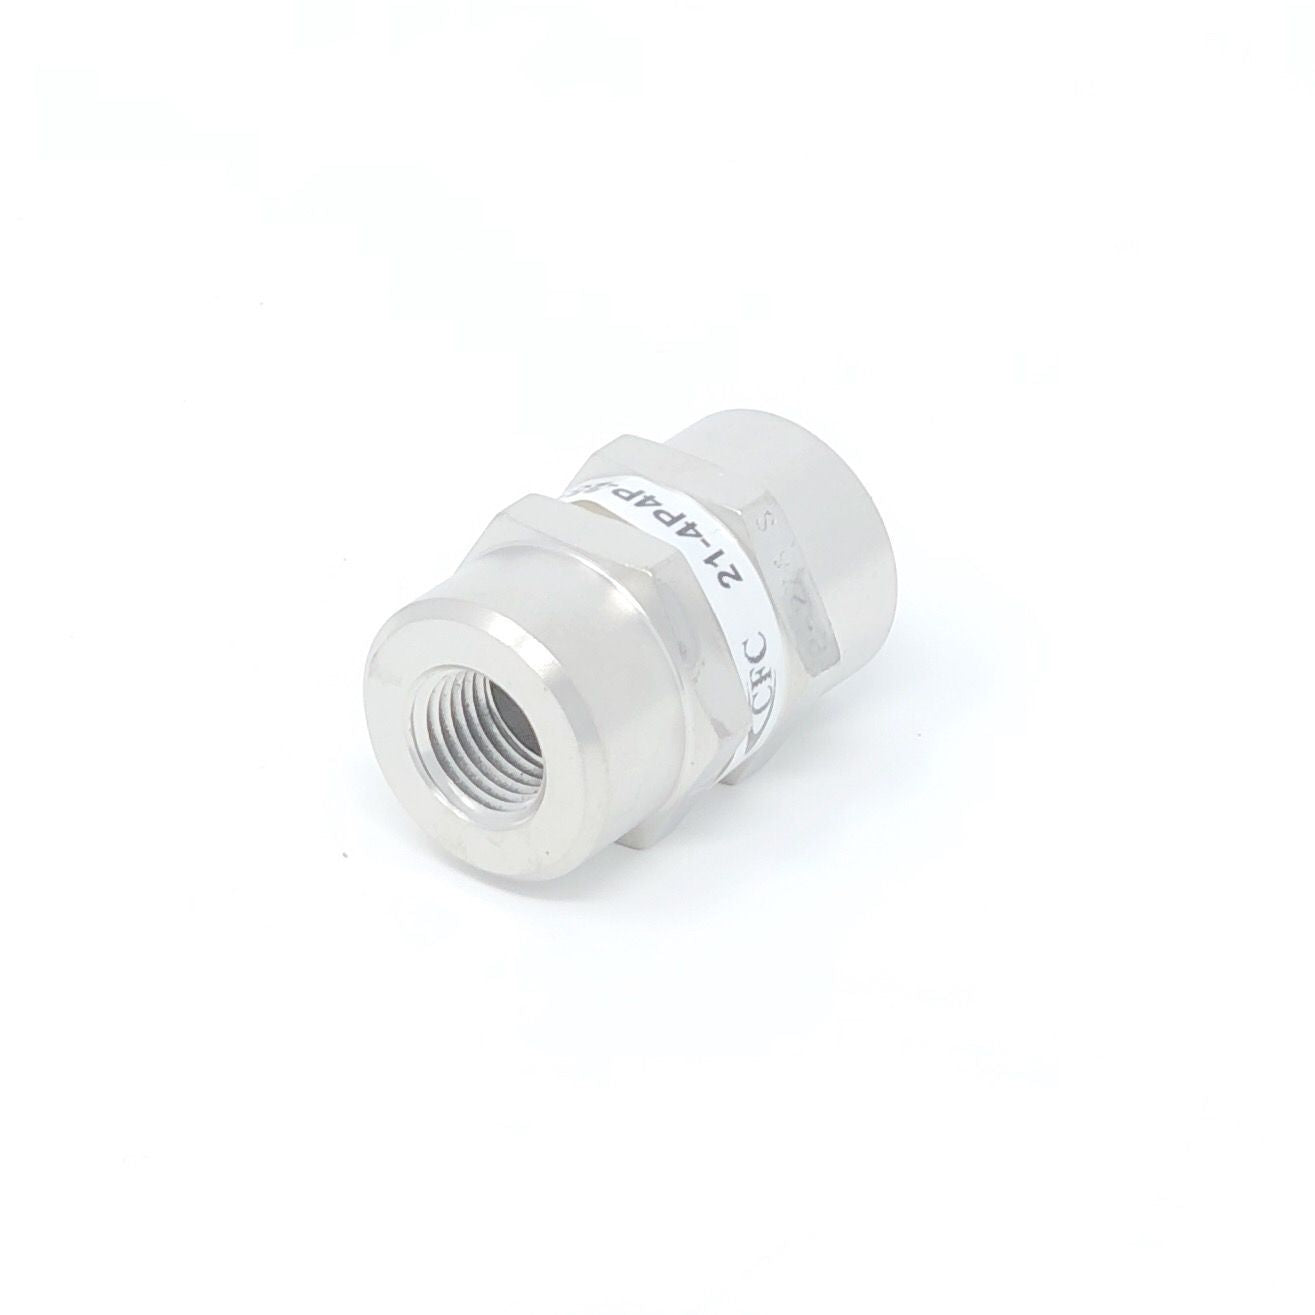 21-8M8M-25S : Chase High Pressure Inline Filter, 3000psi, #8 SAE (1/2"), 25 Micron, No Visual Indicator, With Bypass